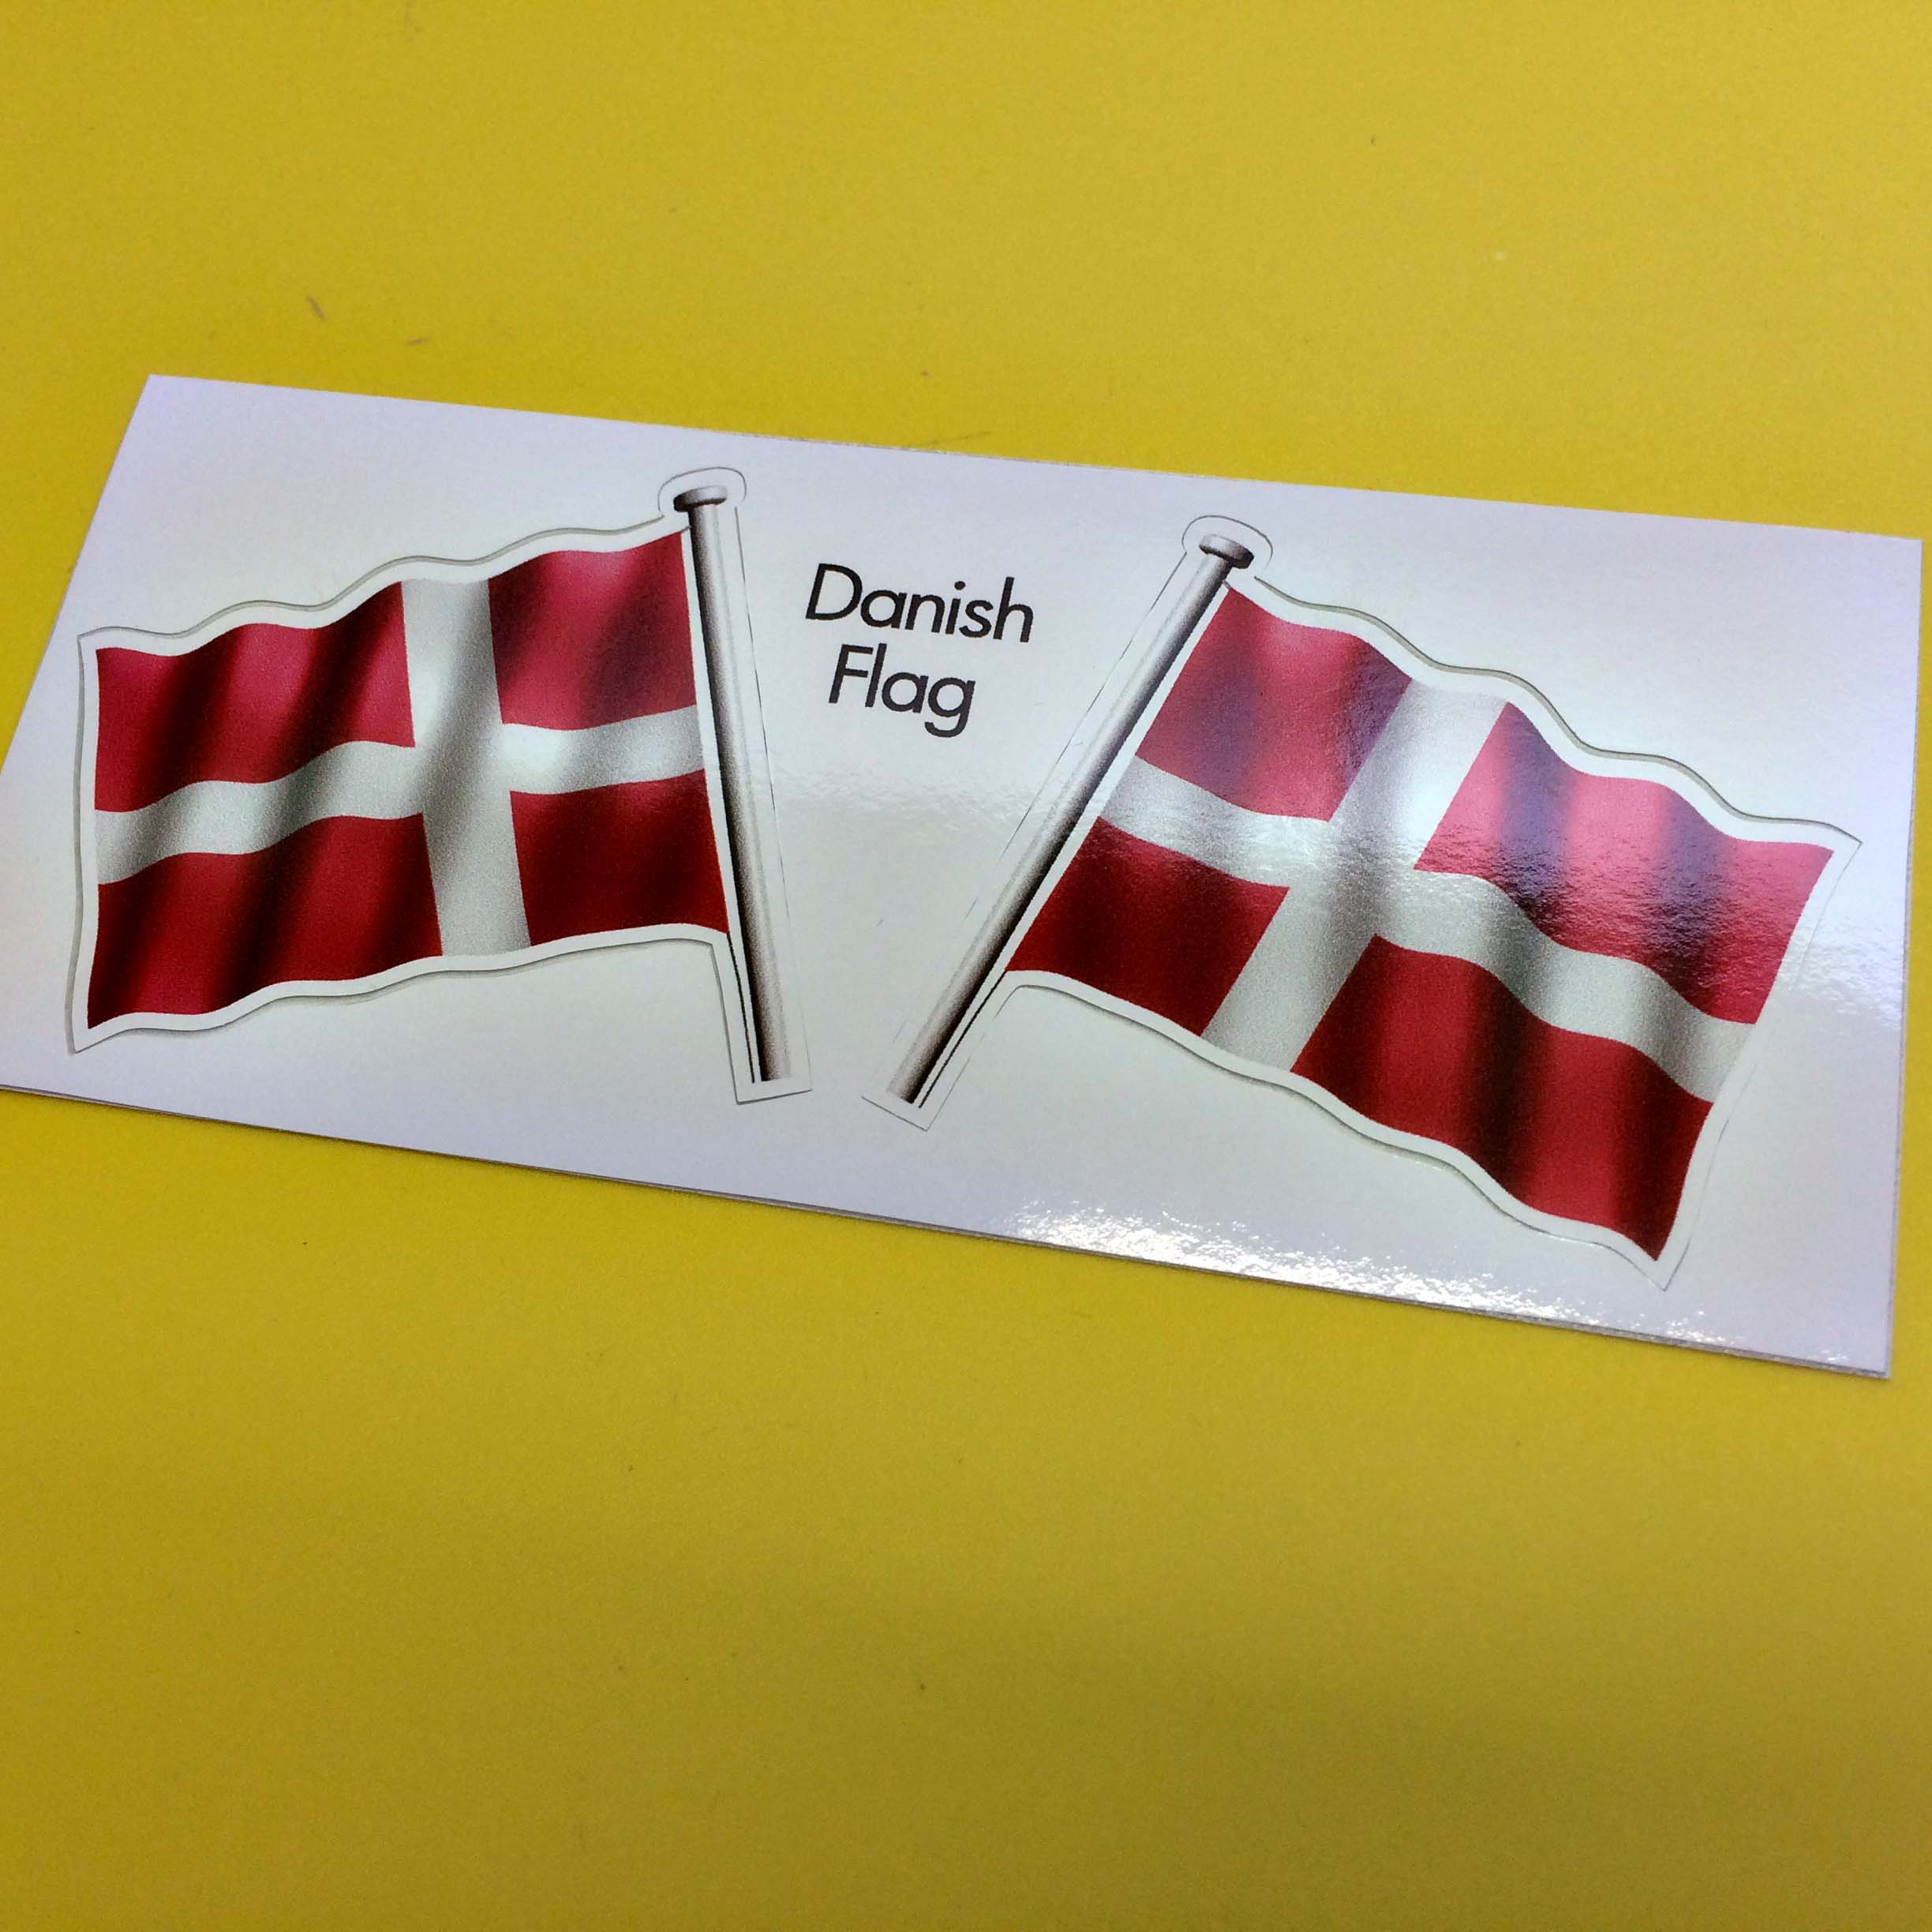 DENMARK FLAG AND POLE STICKERS. A wavy flag of Denmark on a pole. A white cross on a red background.